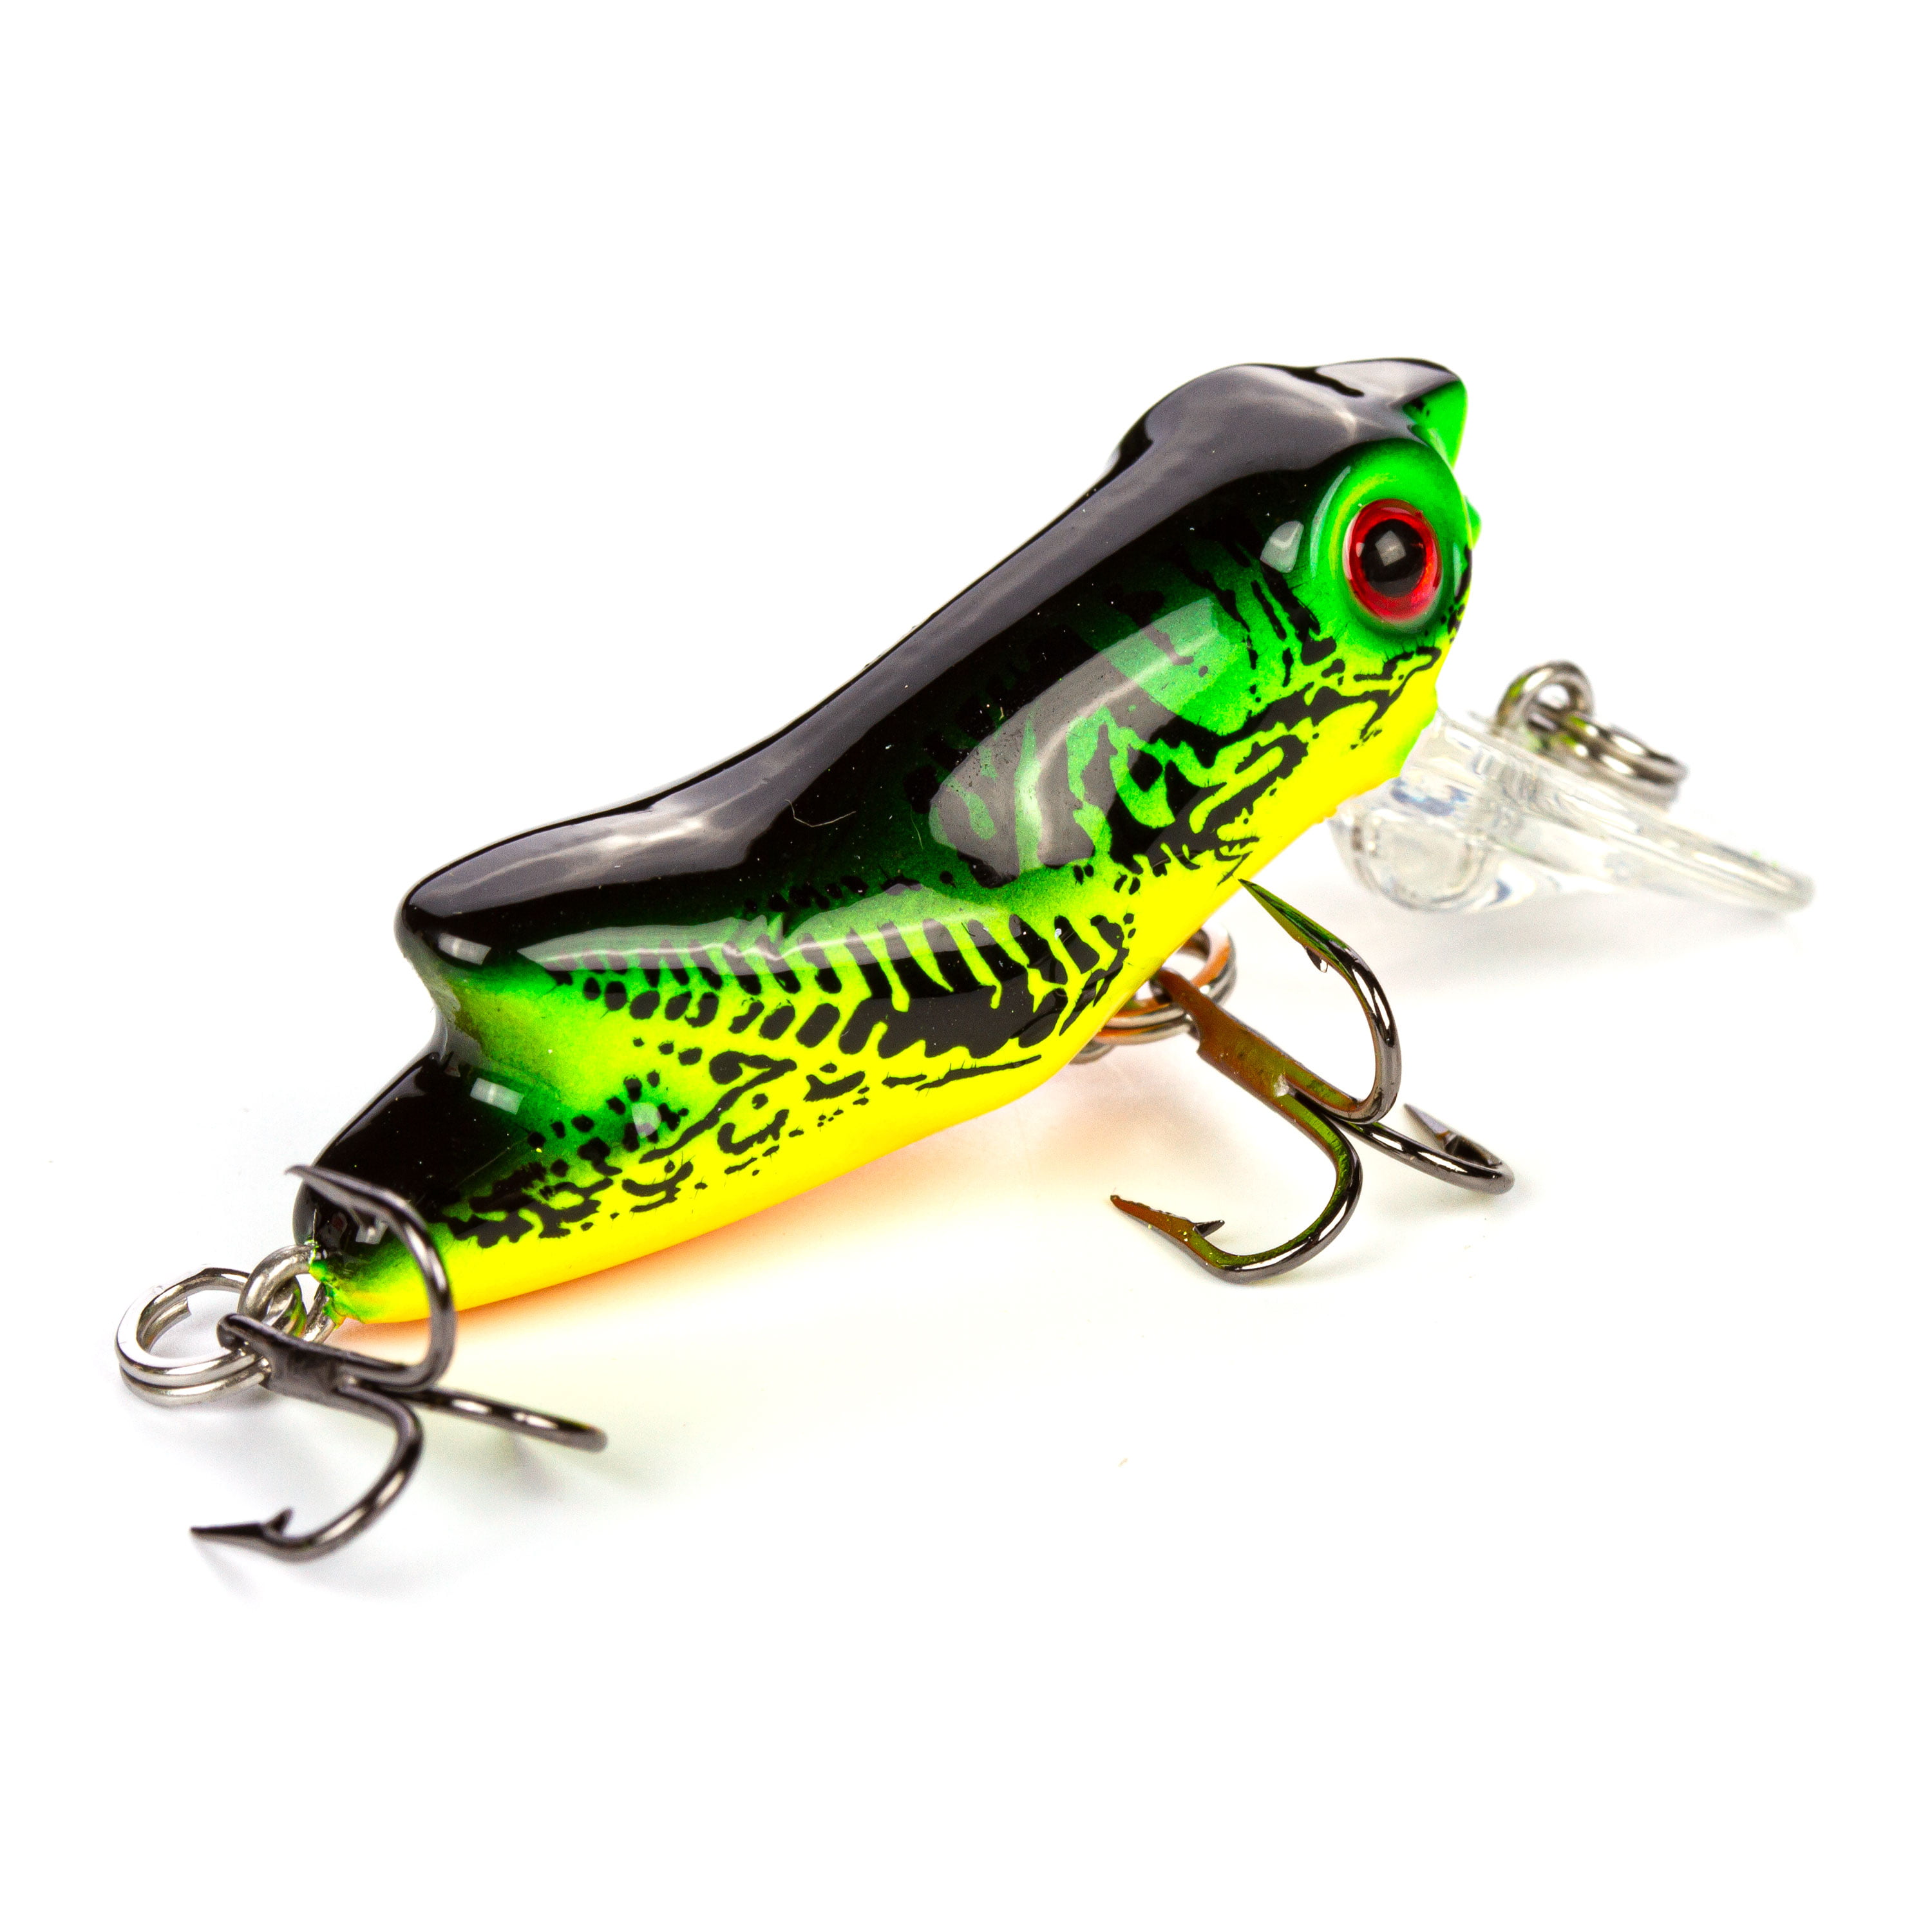  Goture Topwater Frog Lures Fishing Soft Bait Kit